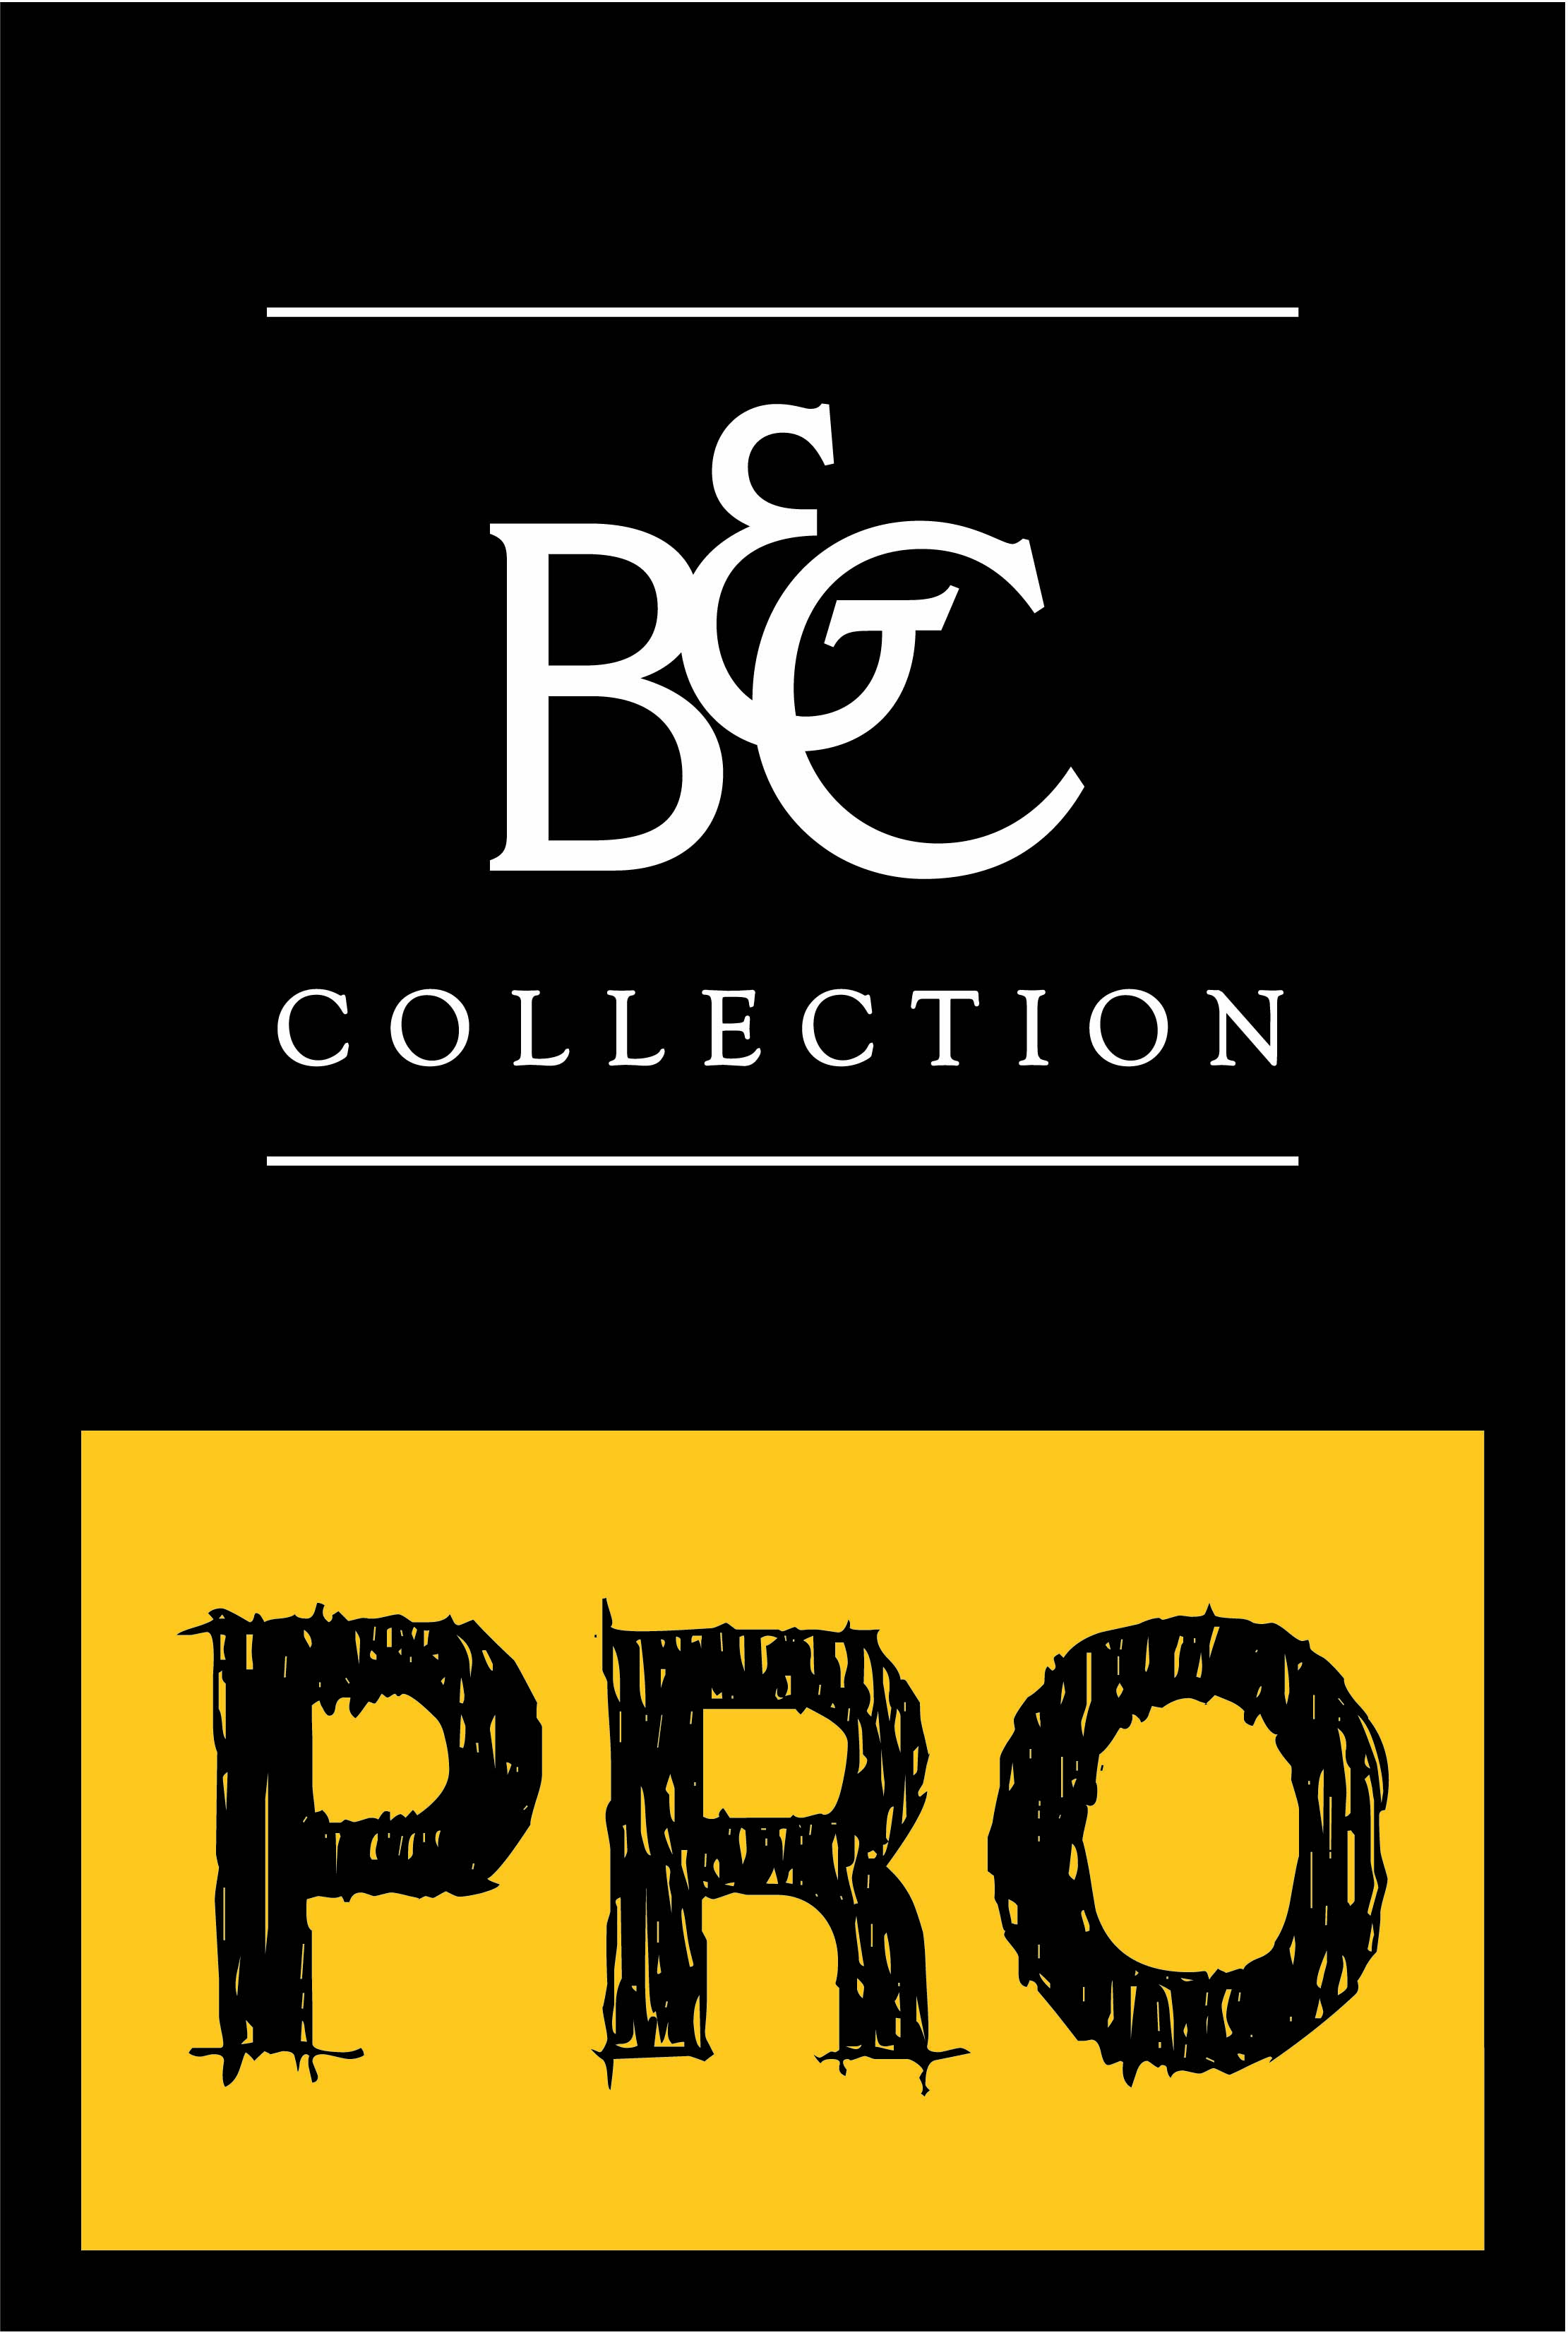 Perfect Pro Tee - BCTUC01 - B&C Pro Collection